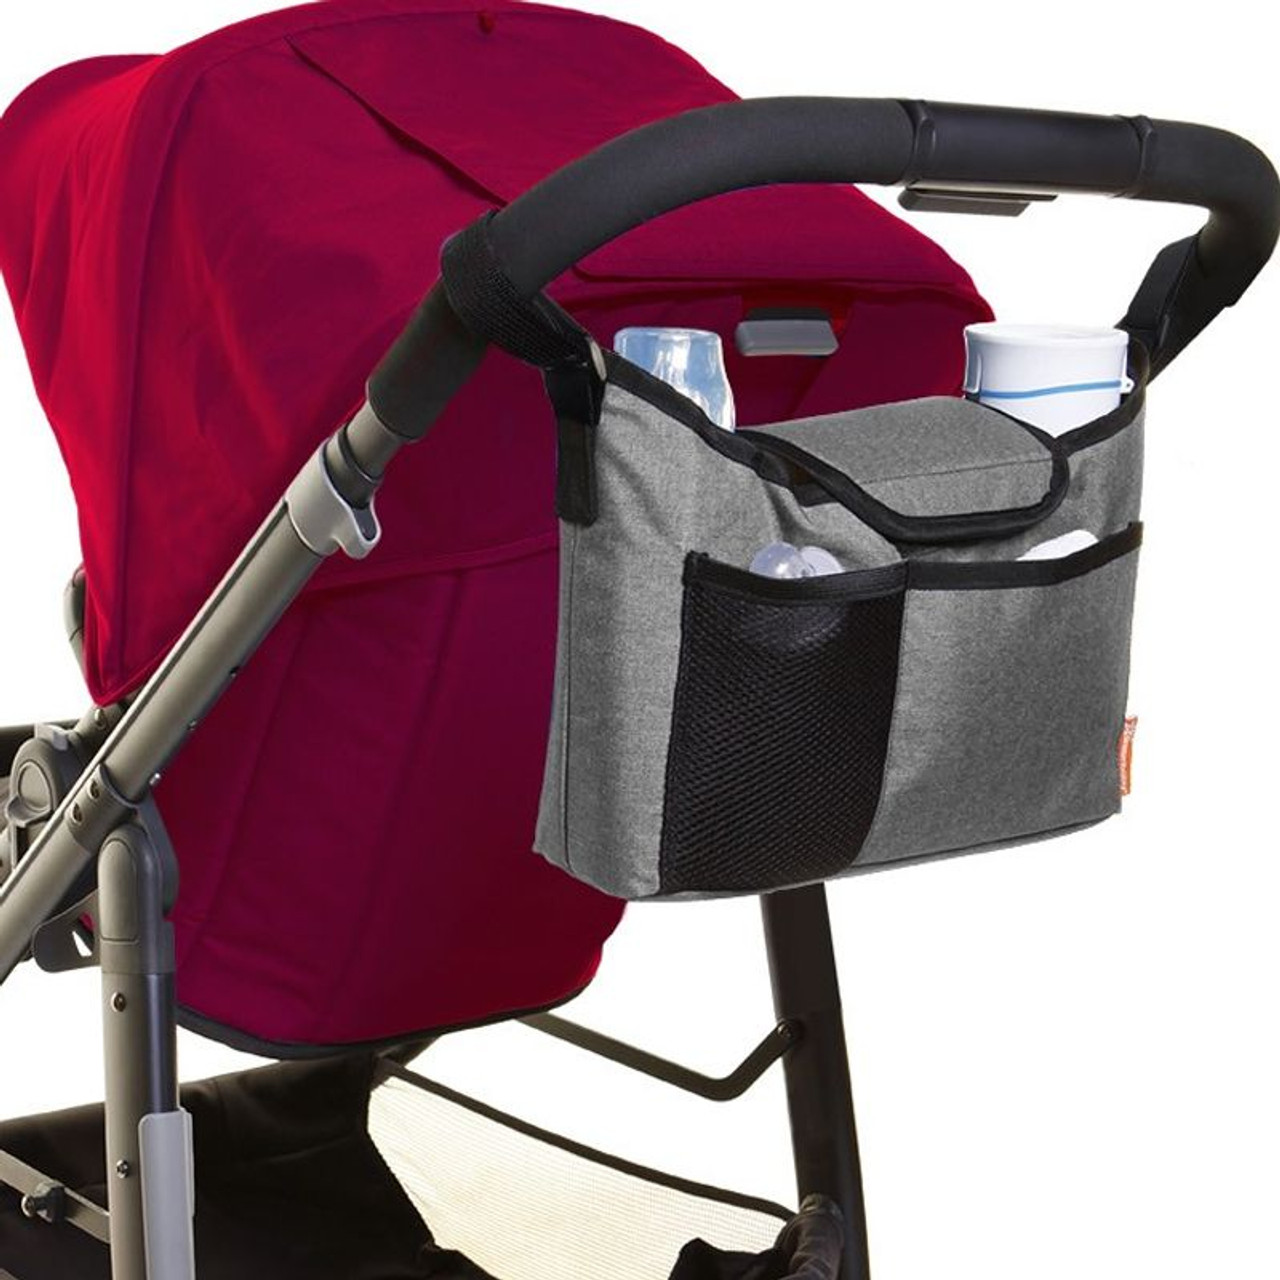 baby on the go buggy bag